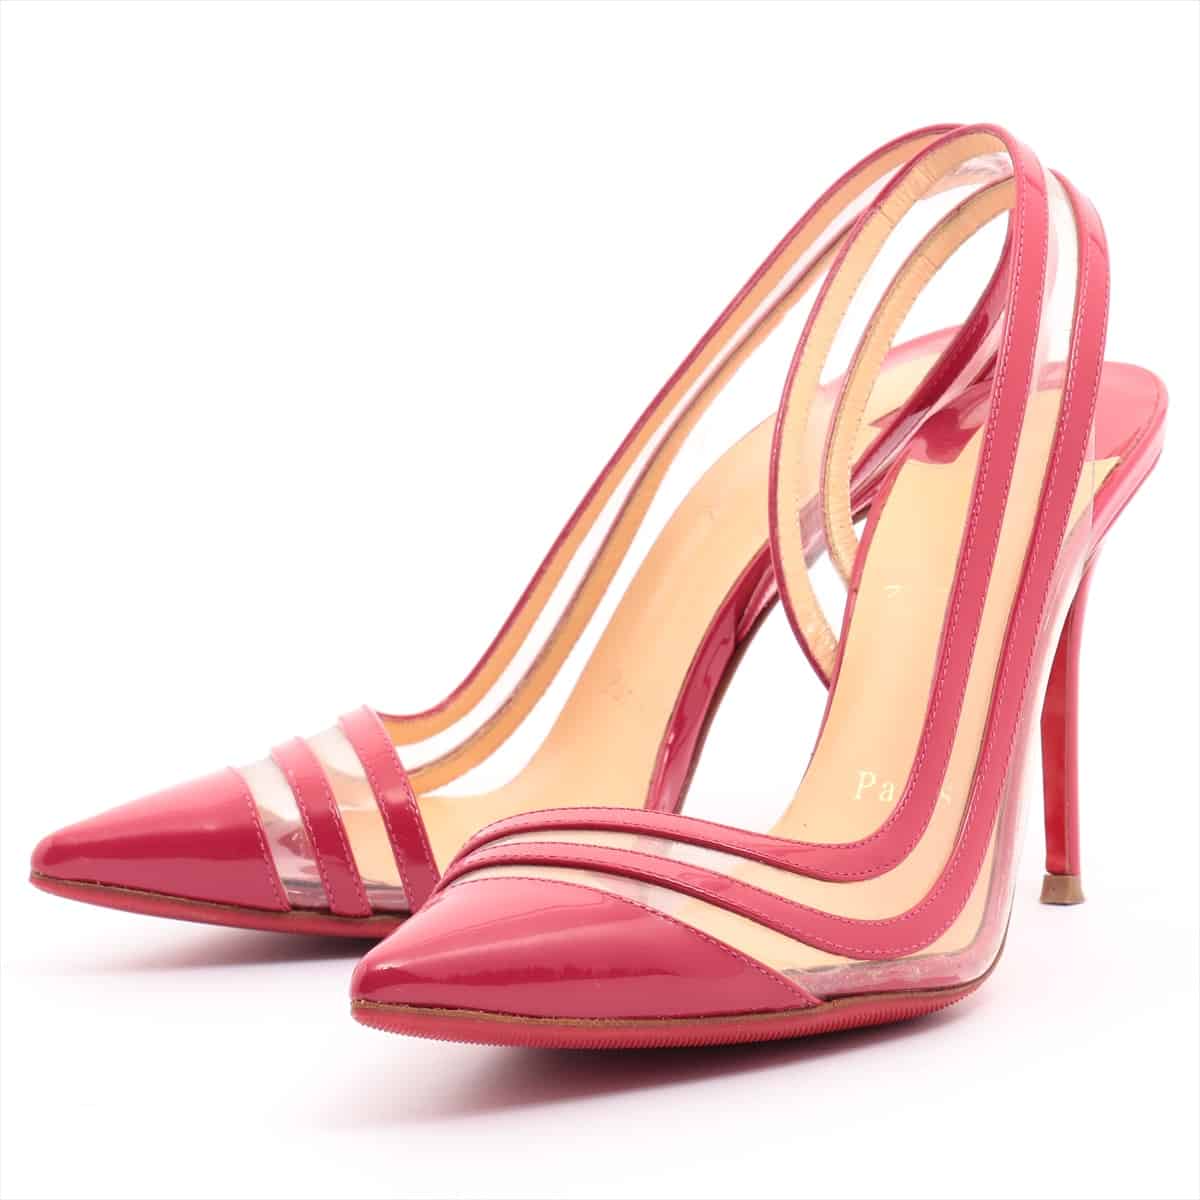 Christian Louboutin Patent leather Pumps 35 1/2 Ladies' Pink